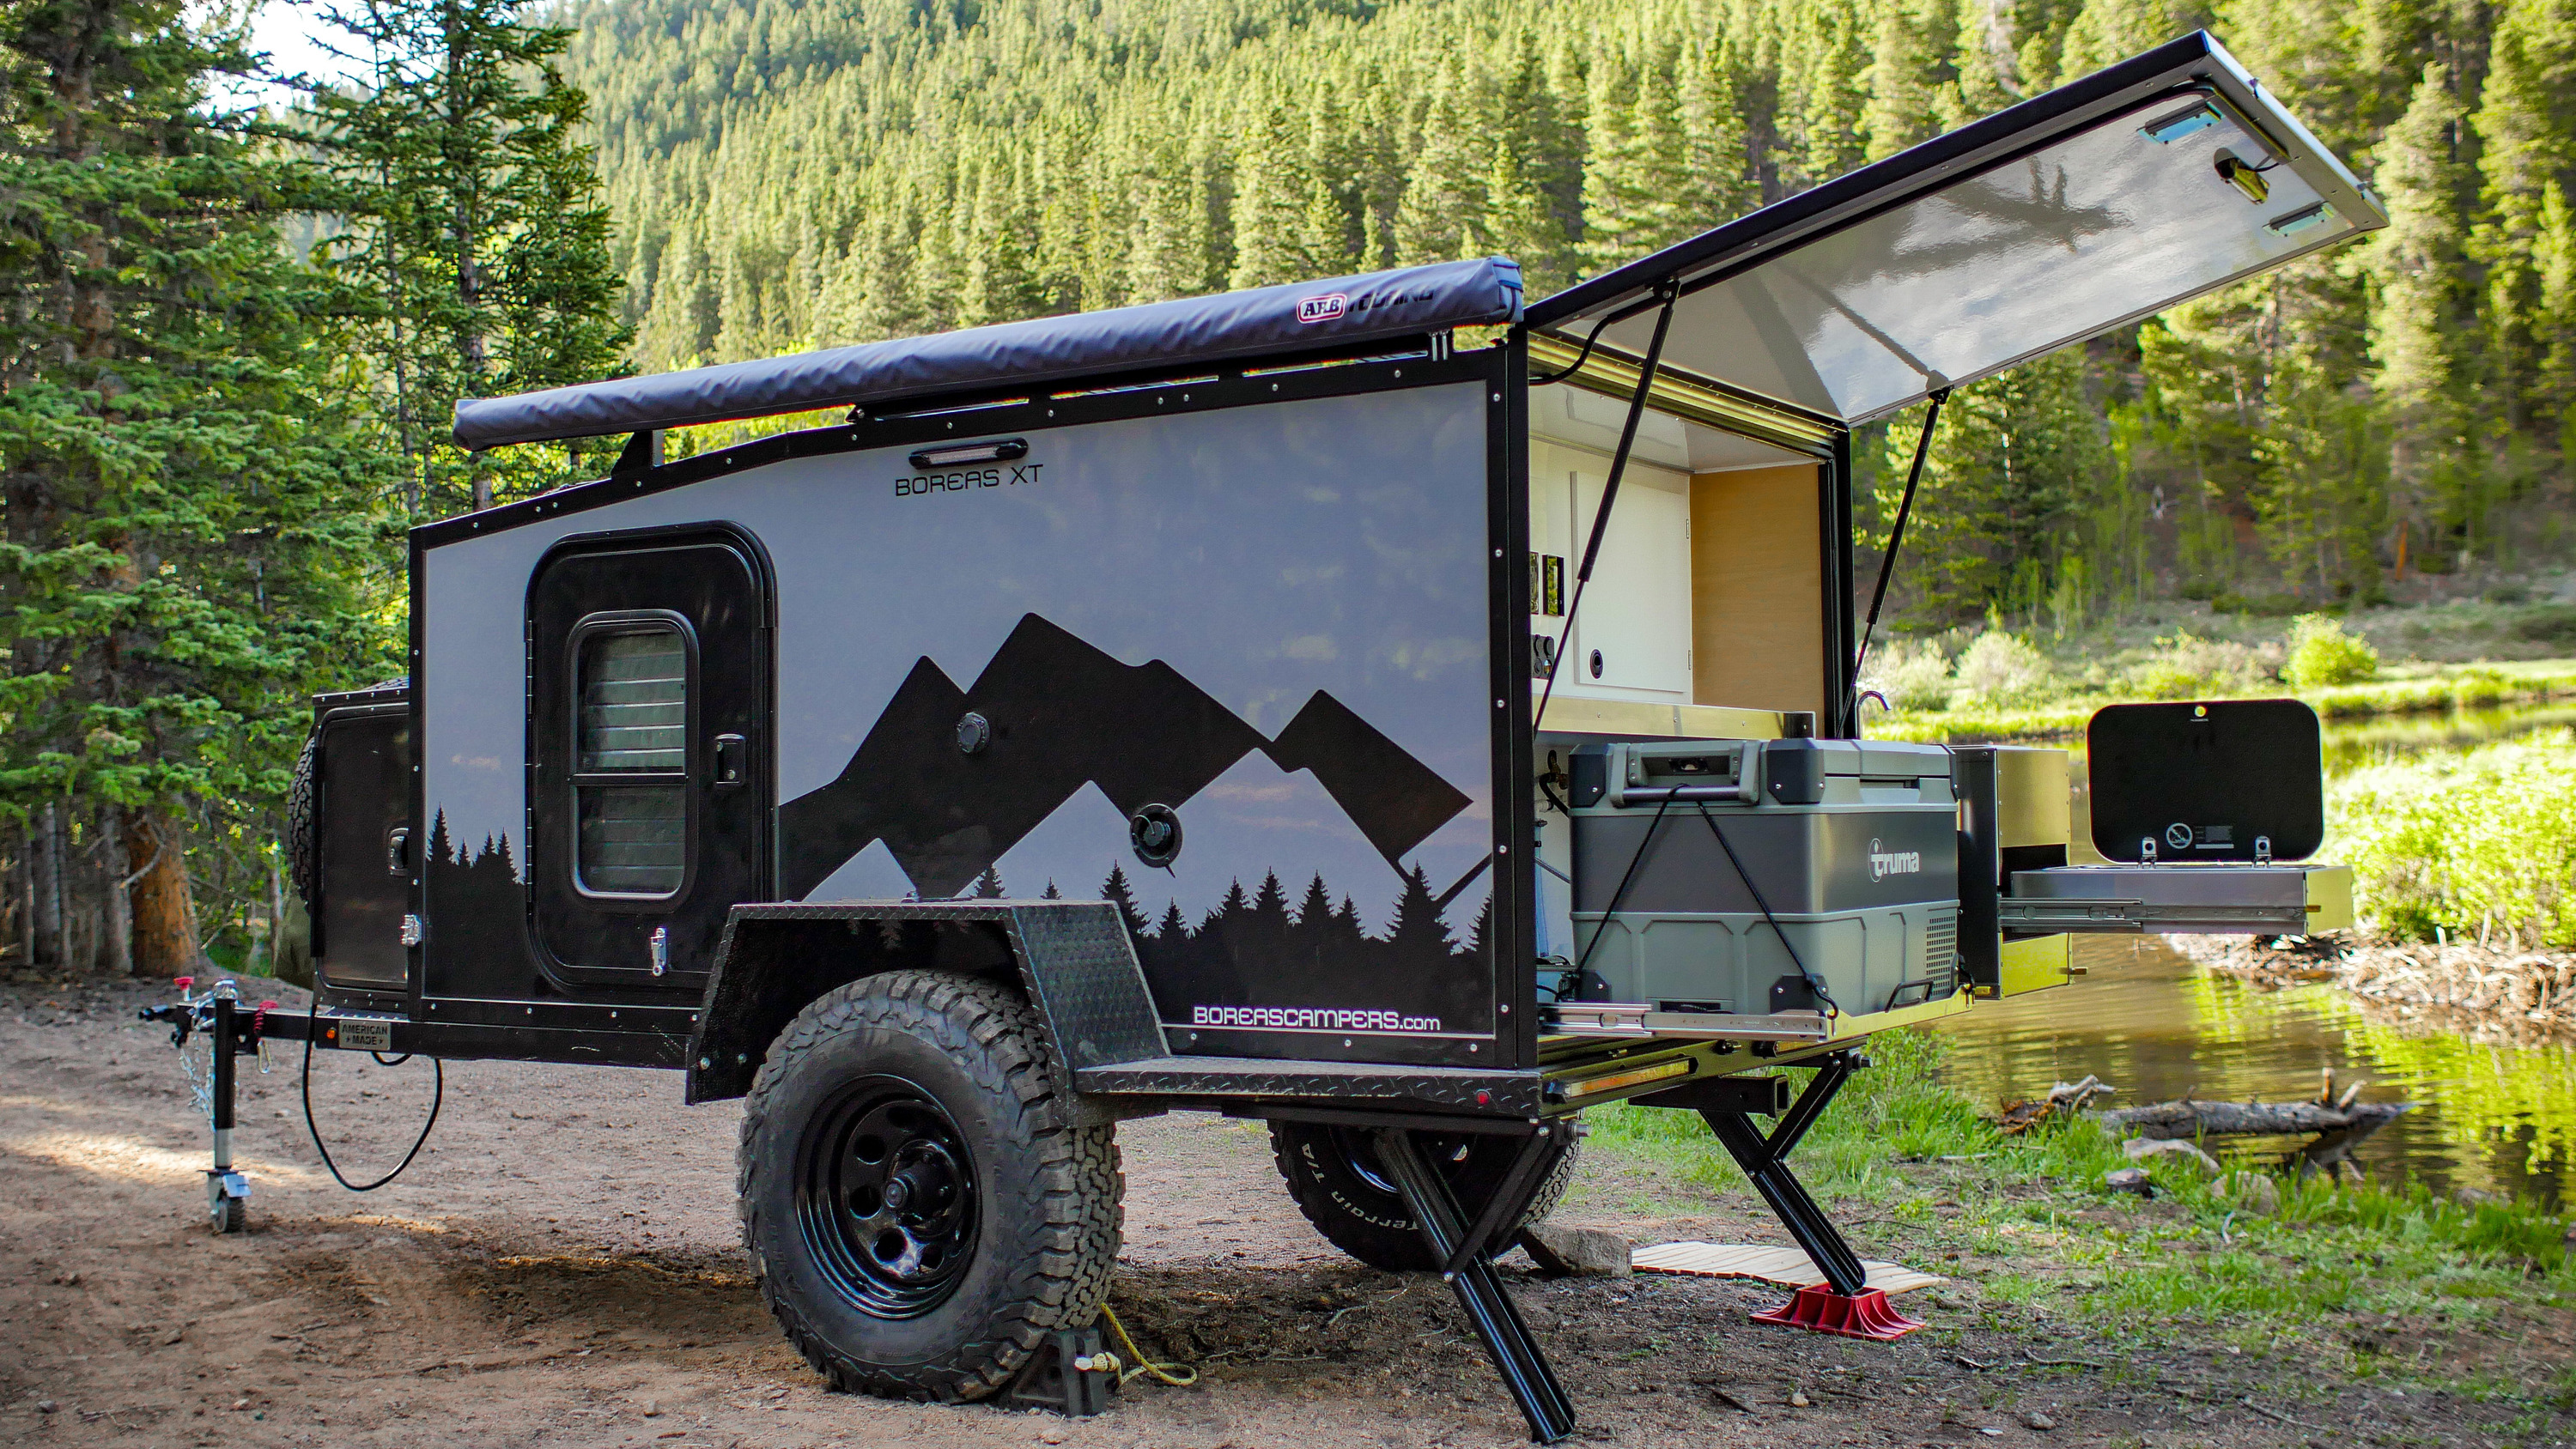 Gallery | Browse All Images of XGRiD's Campers & RVs